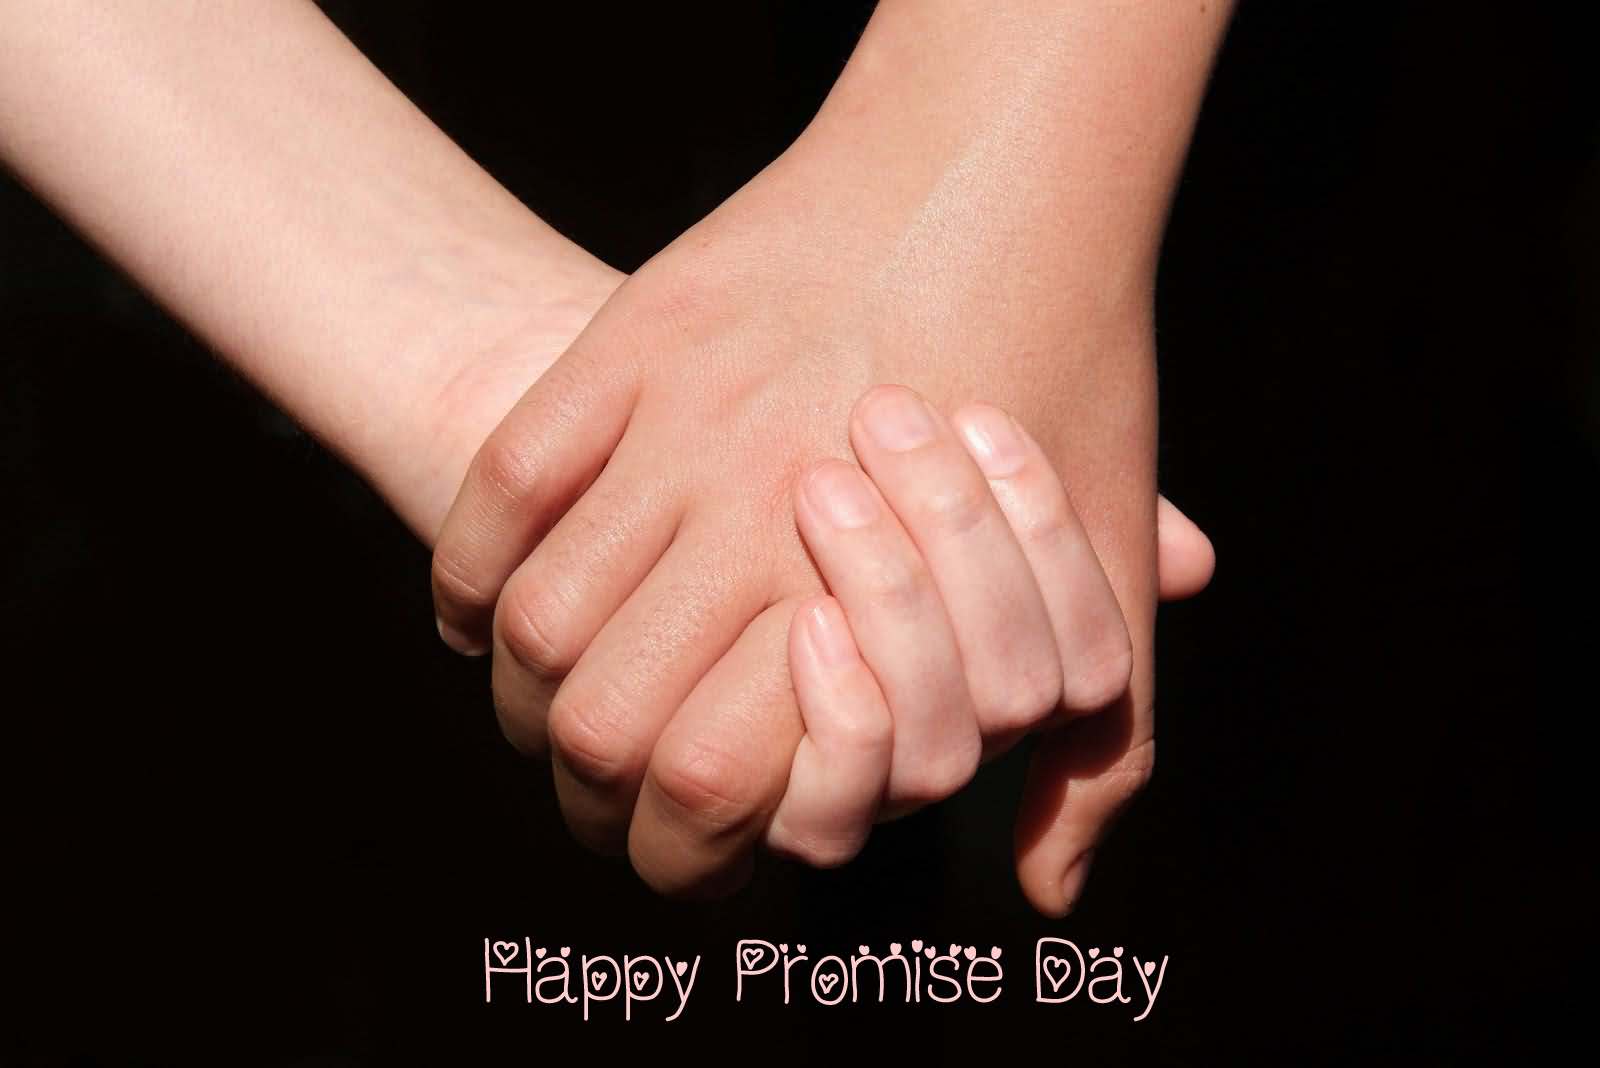 Happy promise day 2018 Holding hands wallpaper